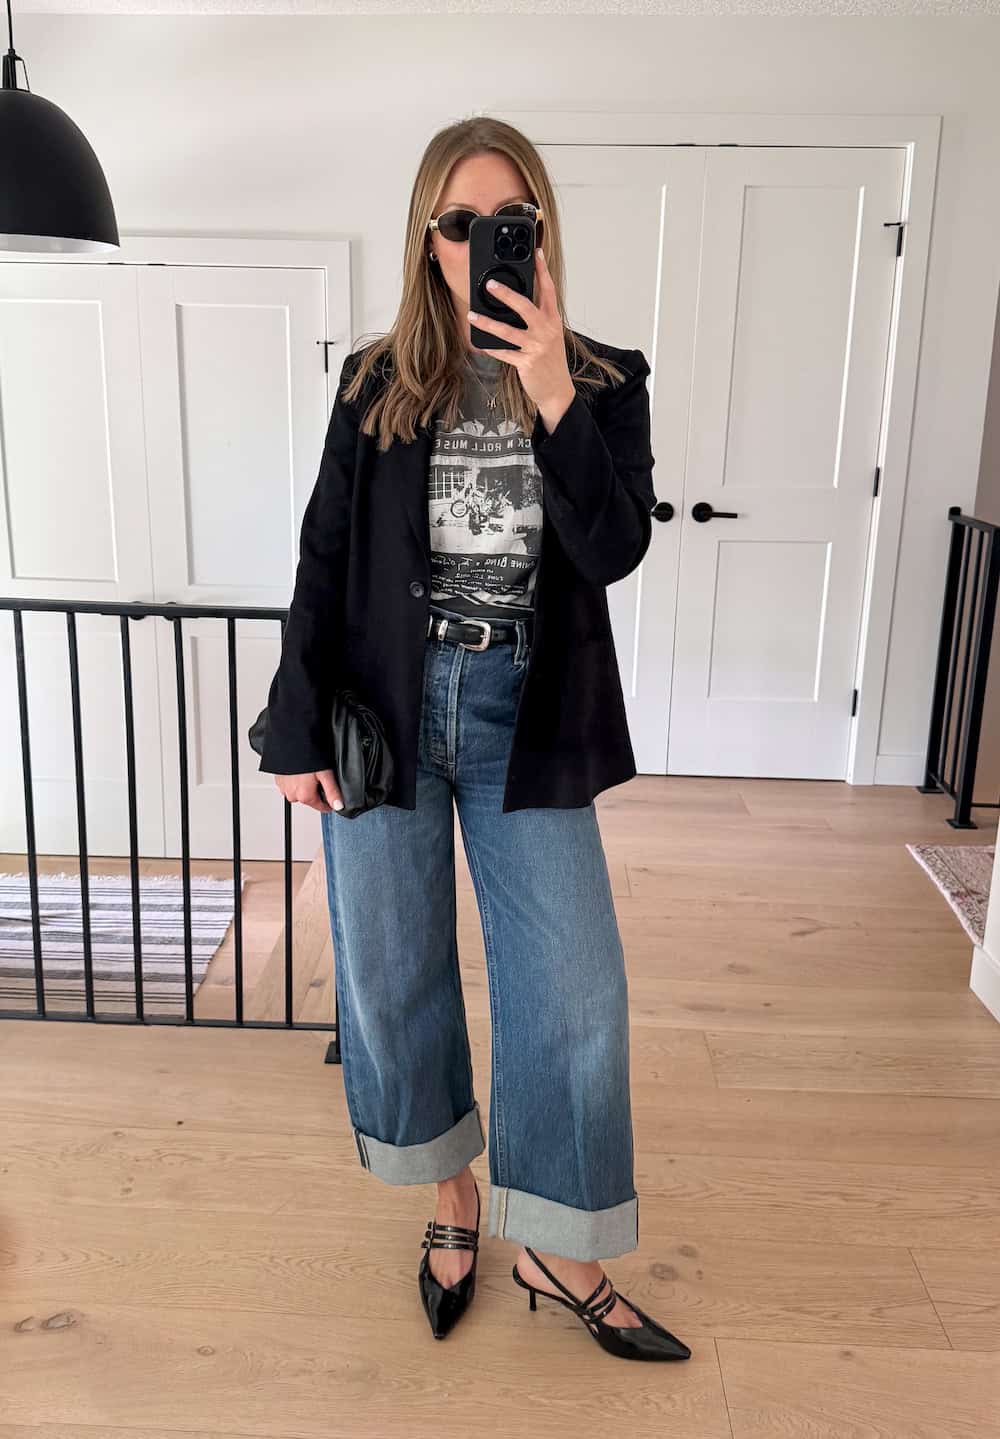 Christal wearing wide-leg jeans with a graphic tee, a black blazer and strappy pointed toe kitten heels.